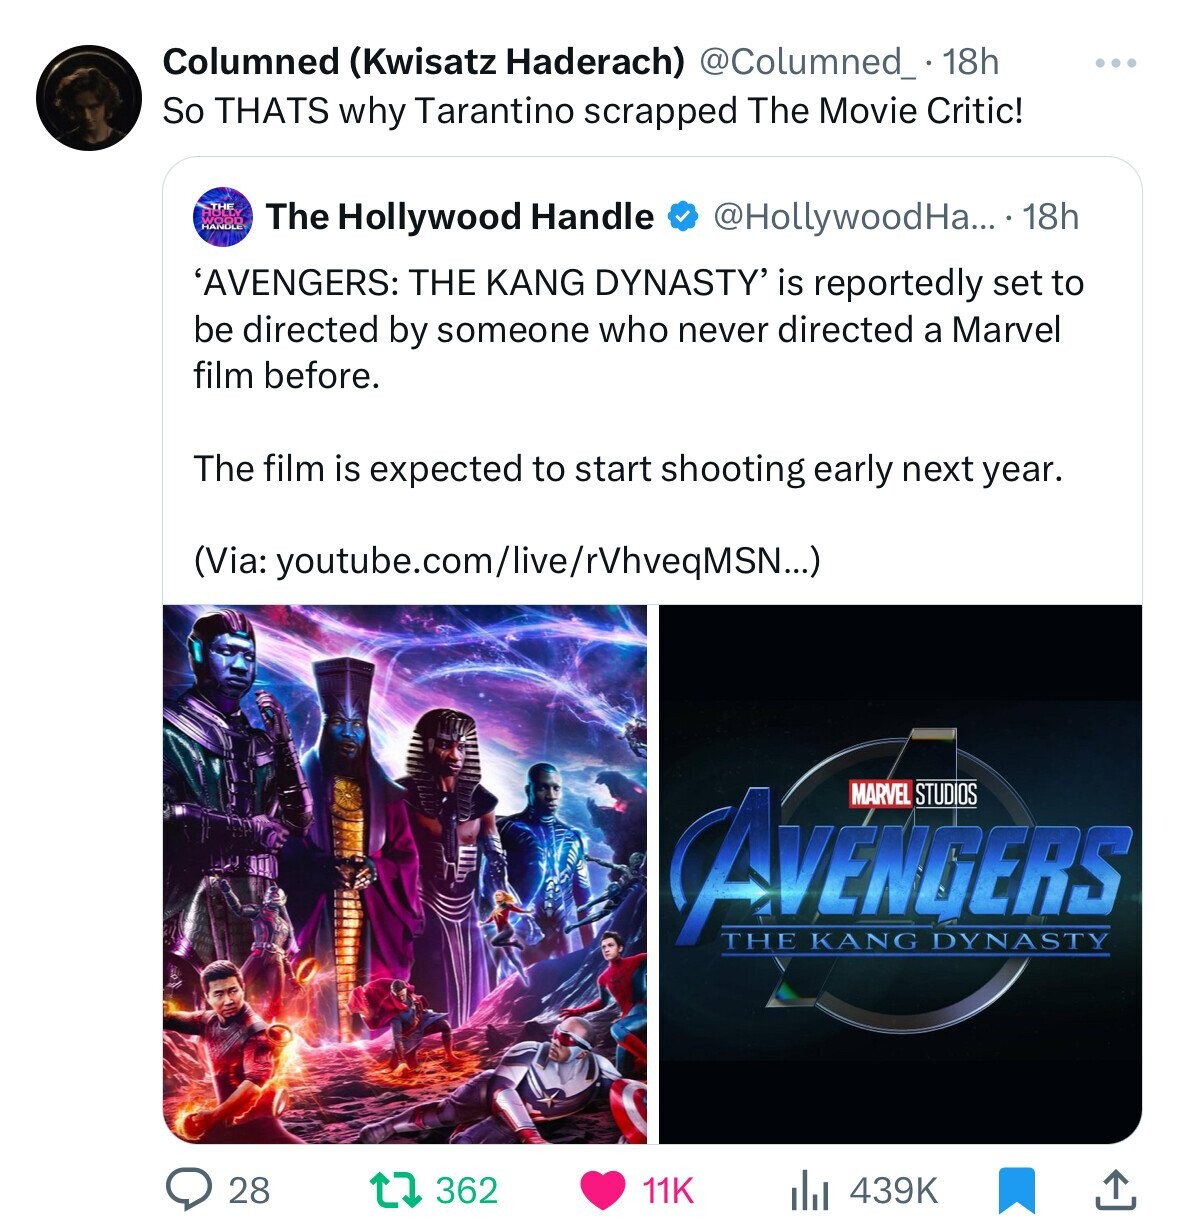 Columned (Kwisatz Haderach) @Columned_ 18h ... So THATS why Tarantino scrapped The Movie Critic! WOOD THE The Hollywood Handle @HollywoodHa....1 18h 'AVENGERS: THE KANG DYNASTY' is reportedly set to be directed by someone who never directed a Marvel film before. The film is expected to start shooting early next year. (Via: youtube.com/live/rVhveqMSN...) AVENGERS MARVEL STUDIOS THE KANG DYNASTY 28 439K 362 11K 